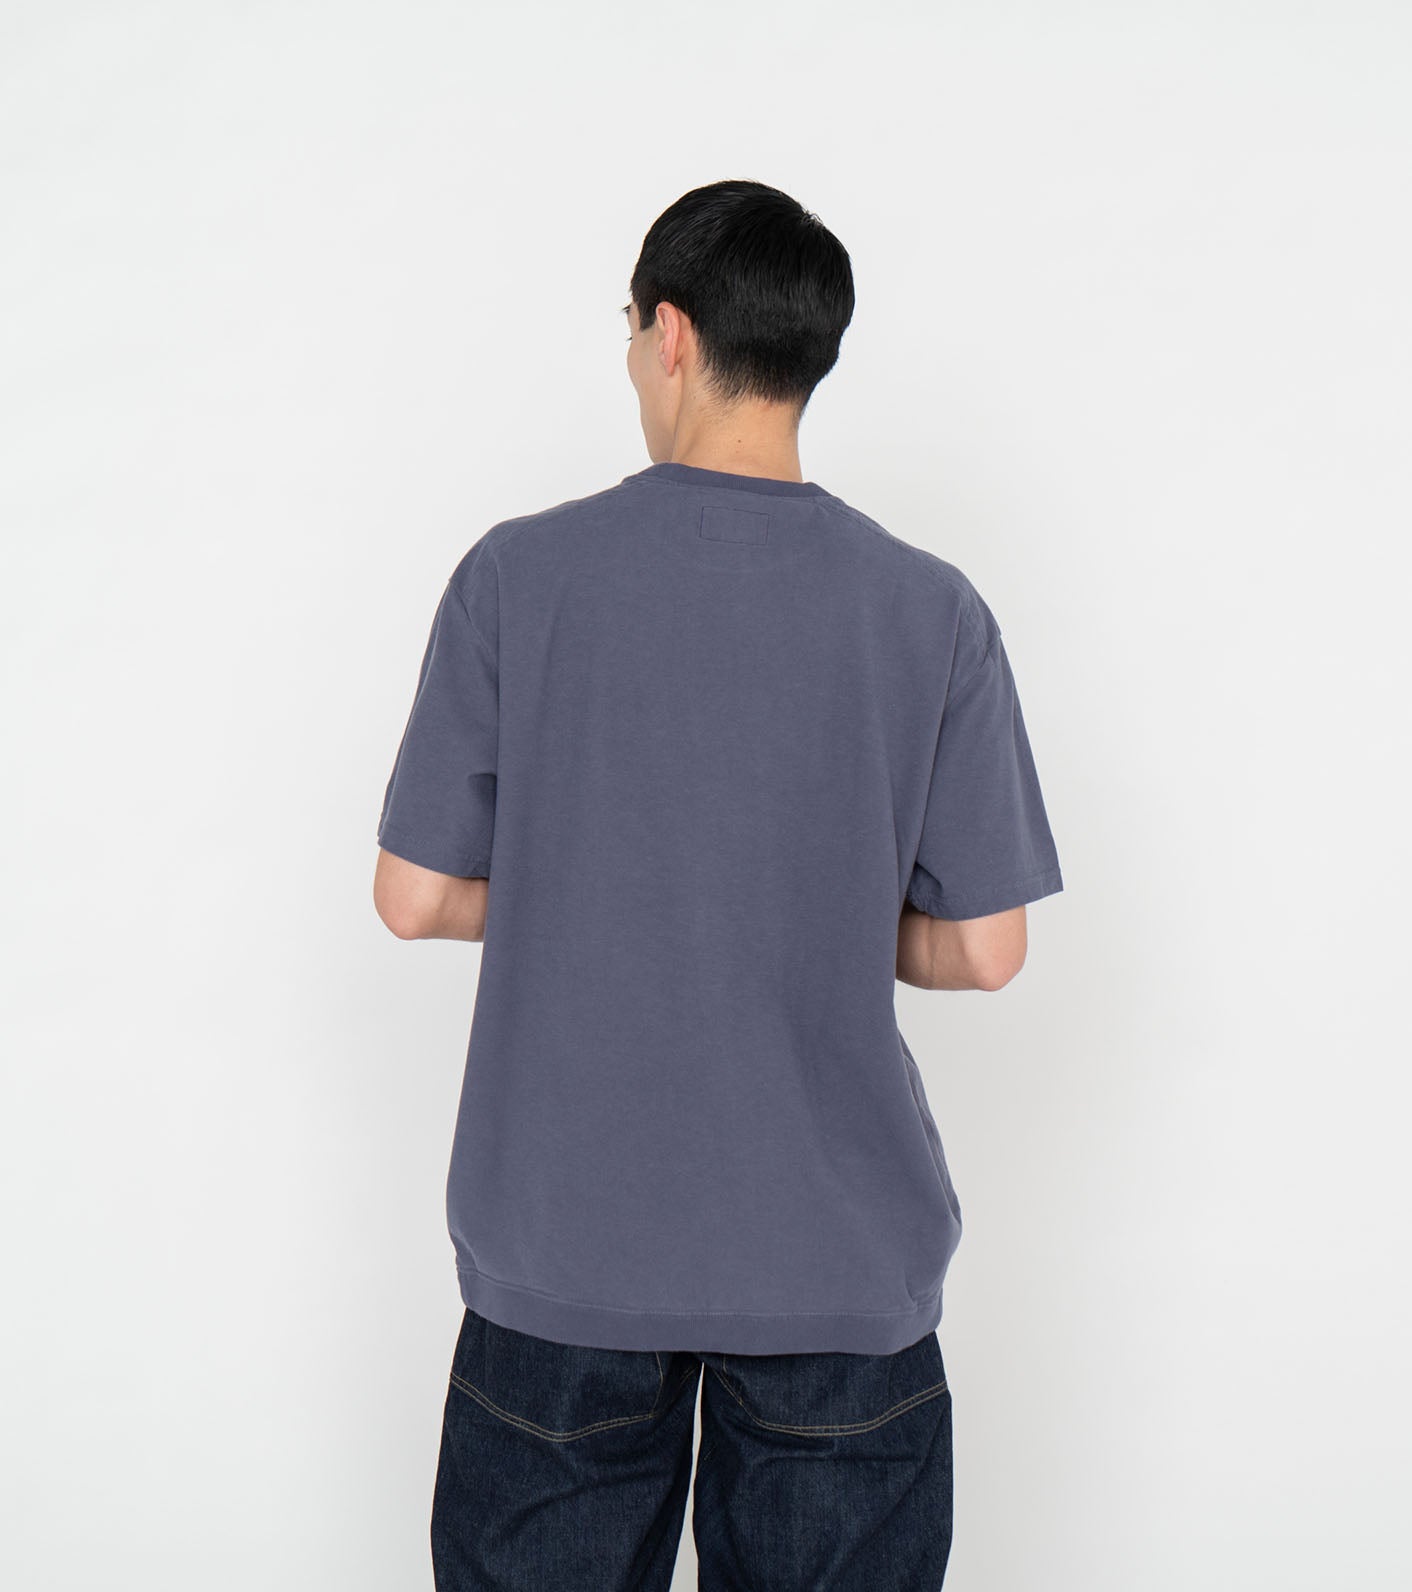 THE NORTH FACE PURPLE LABEL High Bulky HS Pocket Tee 2023FW